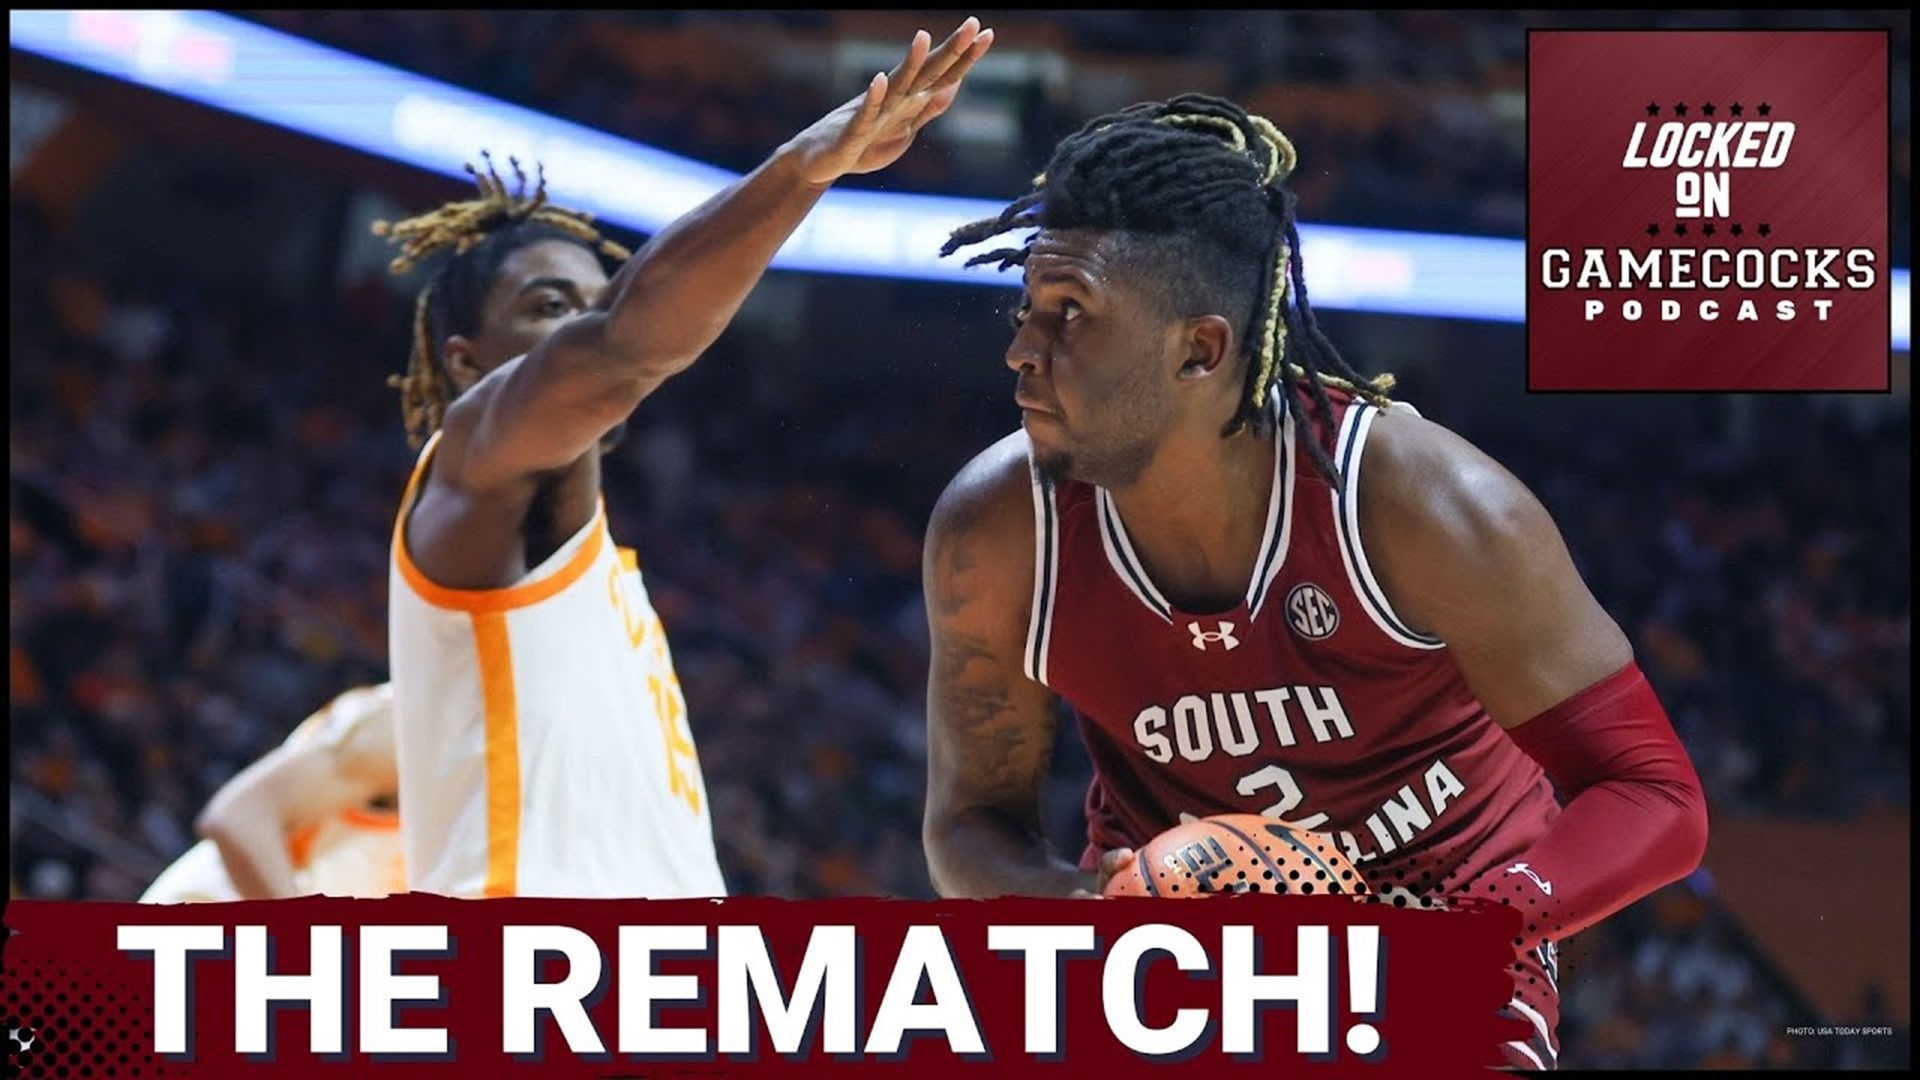 South Carolina's Men's Basketball Team Should Feel CONFIDENT In Their Matchup Against #4 Tennessee!